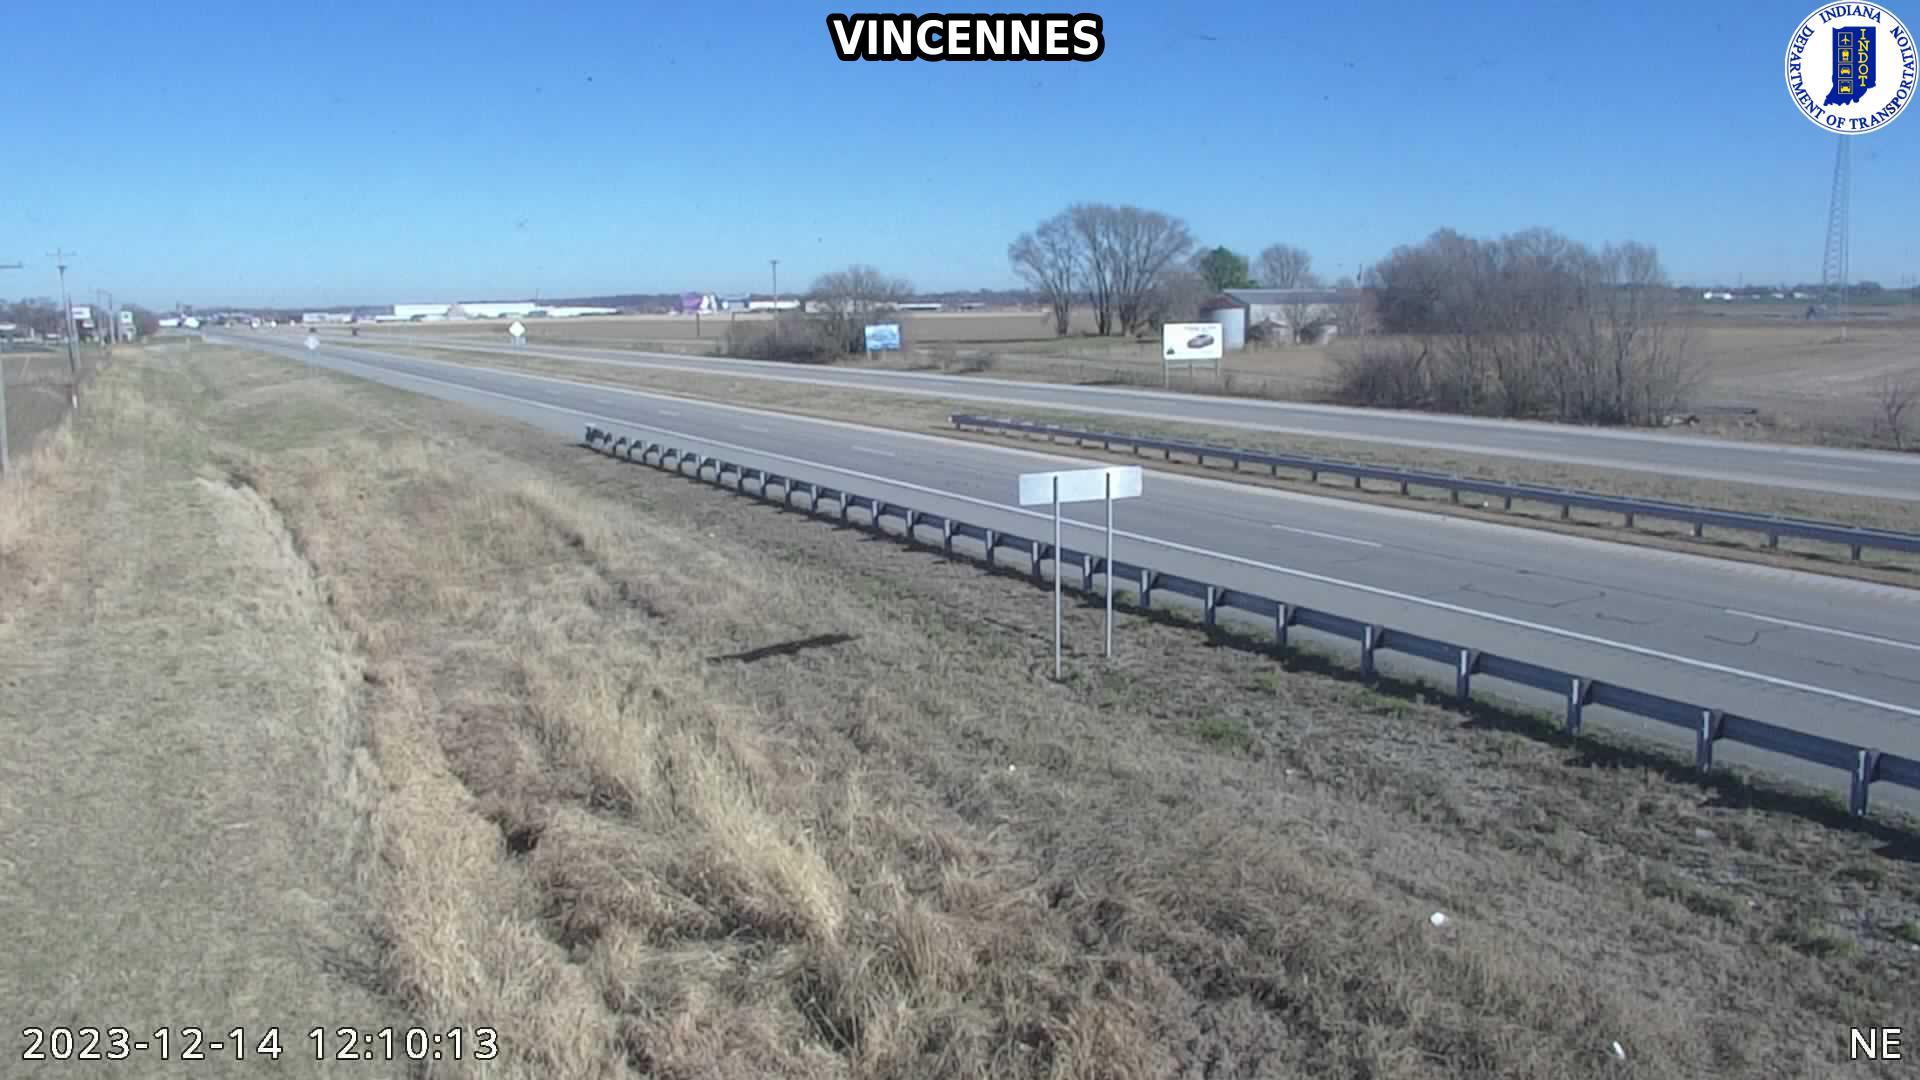 Purcell: US-41: VINCENNES Traffic Camera